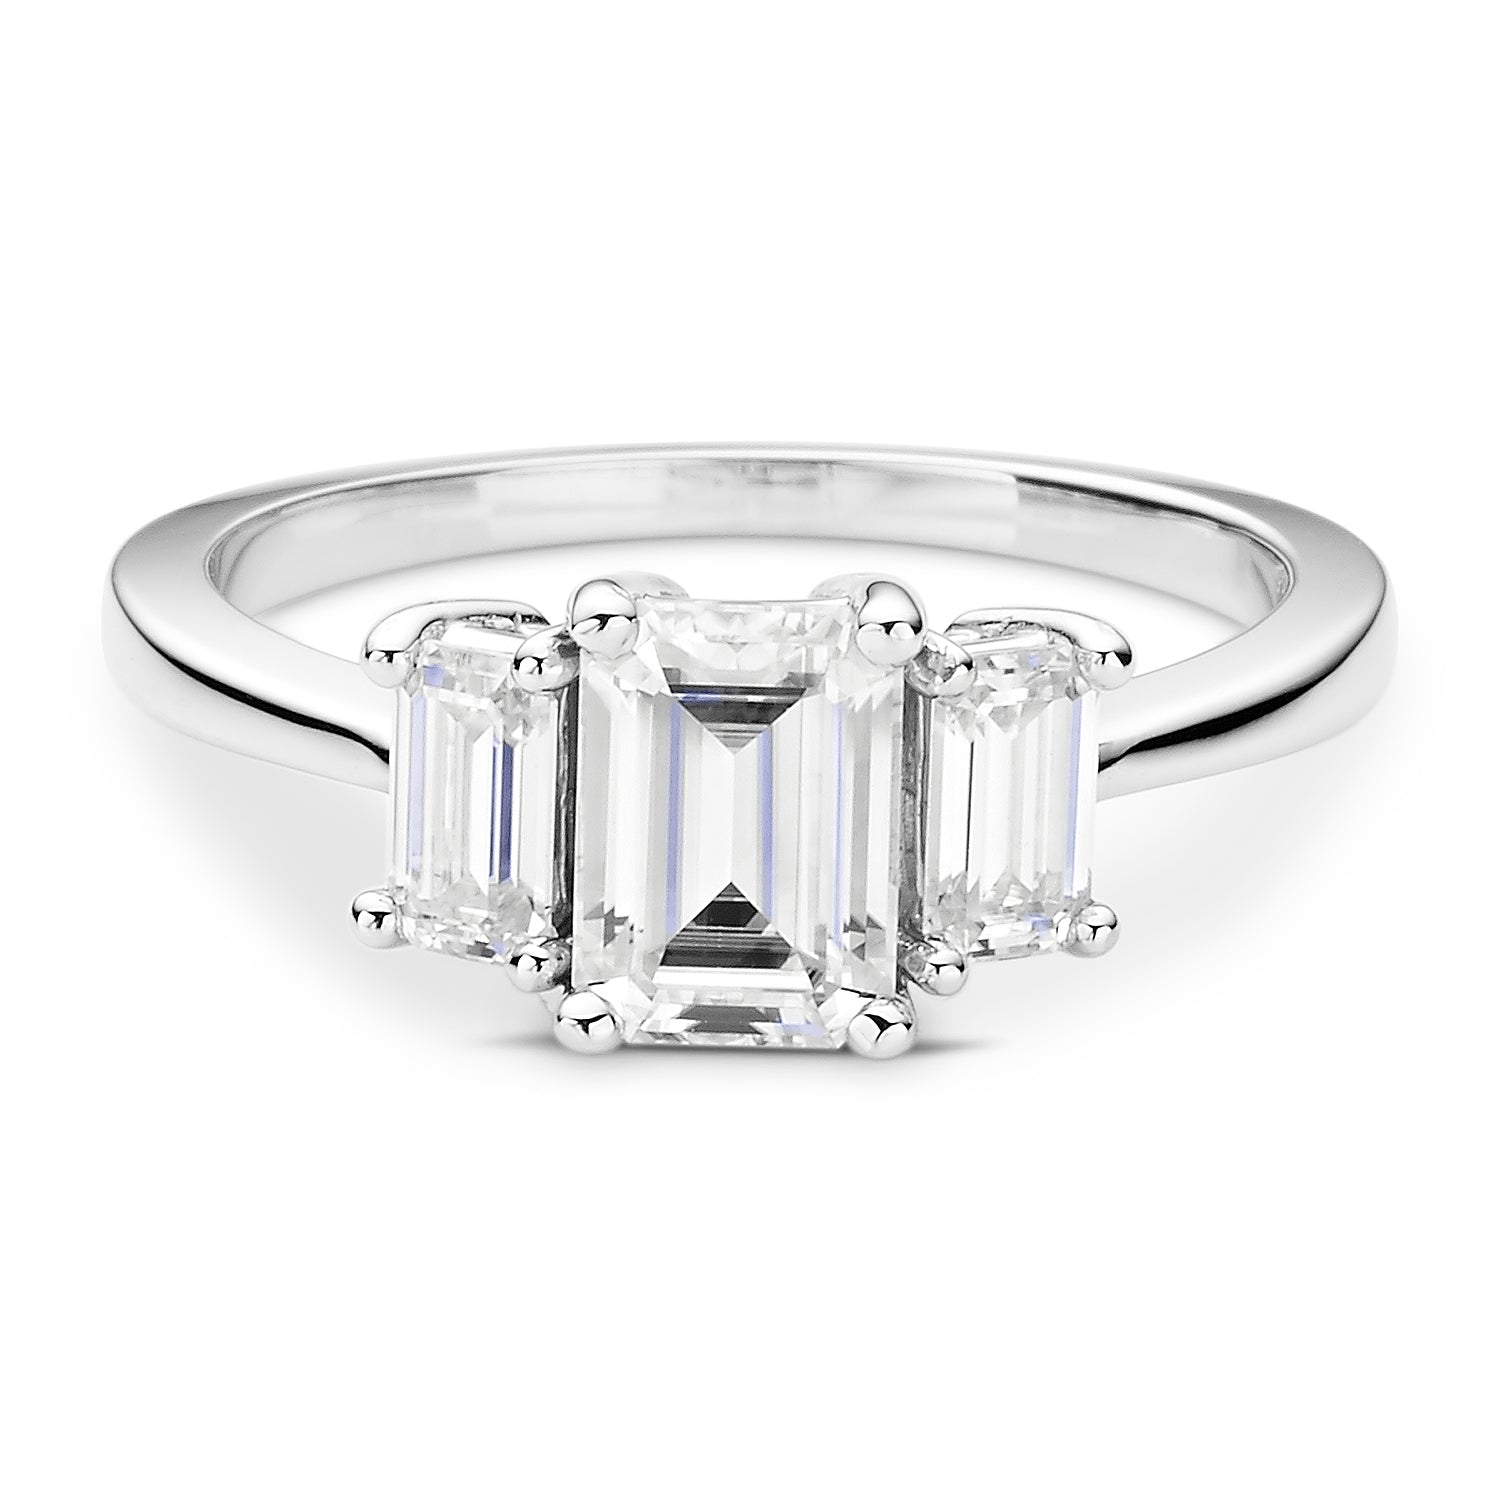 Charles & Colvard Moissanite Emerald Cut Three Stone Ring in White Gold-612941 - Jewelry by Johan